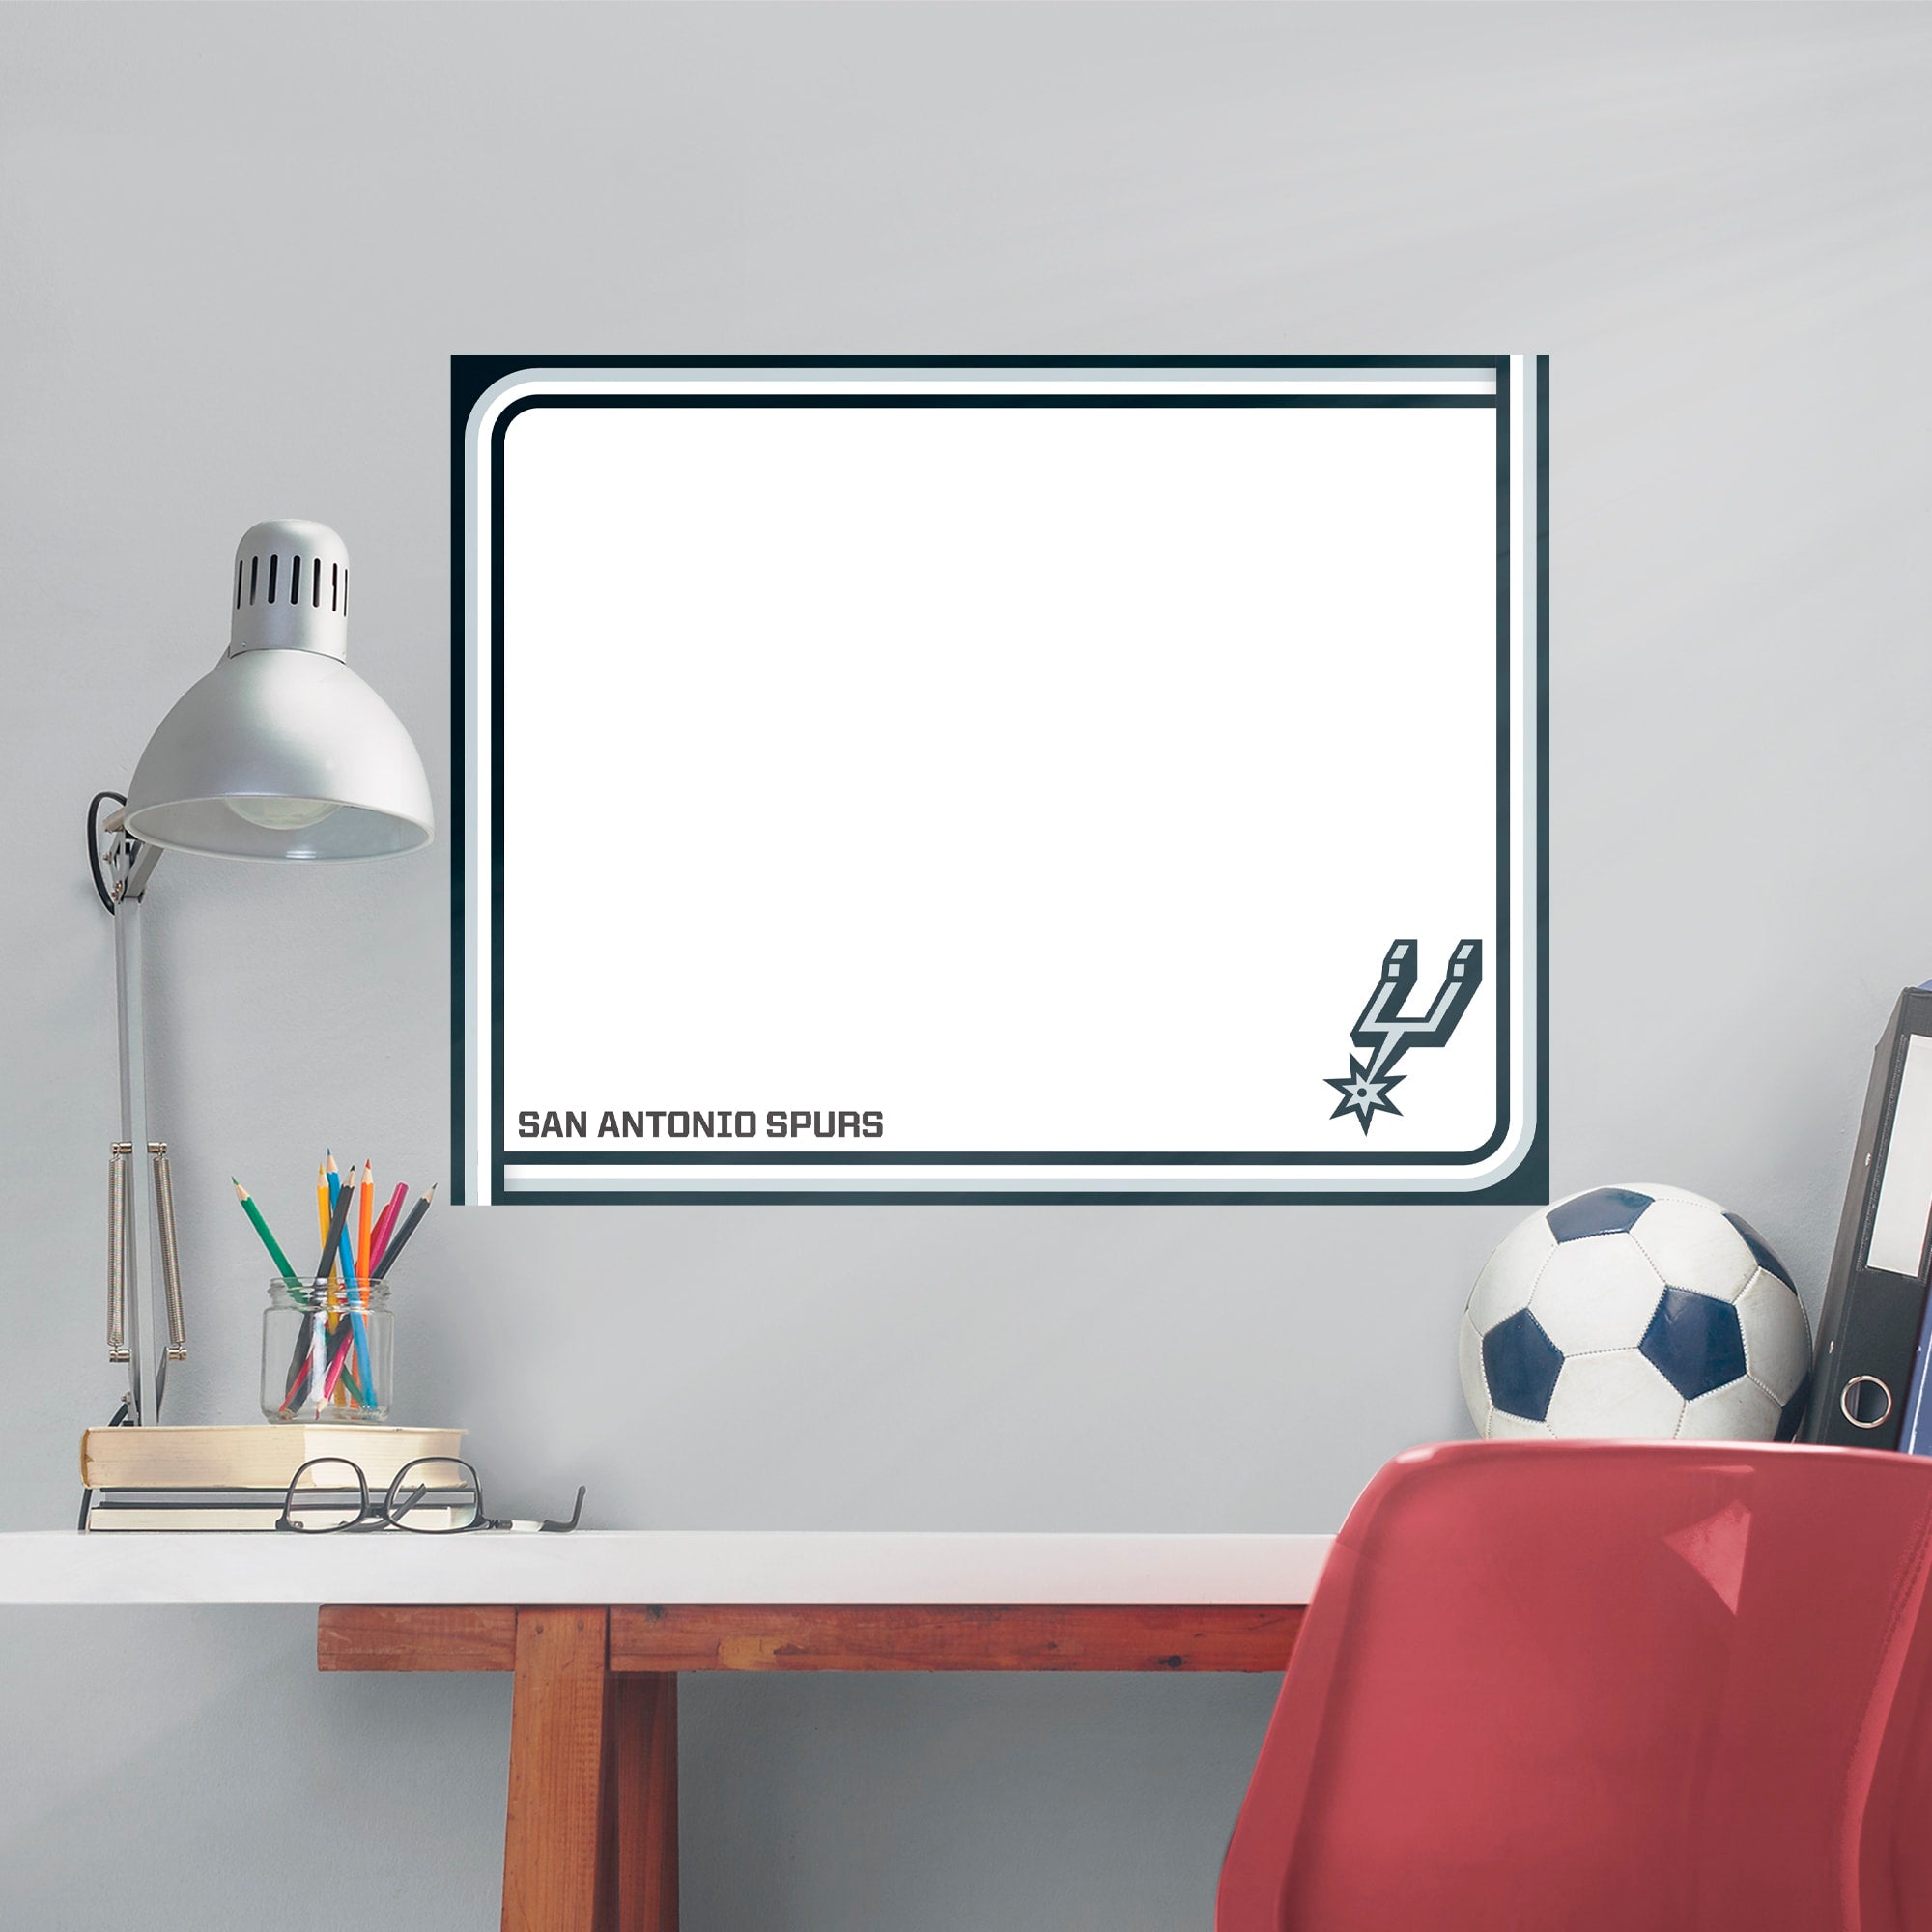 San Antonio Spurs for San Antonio Spurs: Dry Erase Whiteboard - Officially Licensed NBA Removable Wall Decal XL by Fathead | Vin